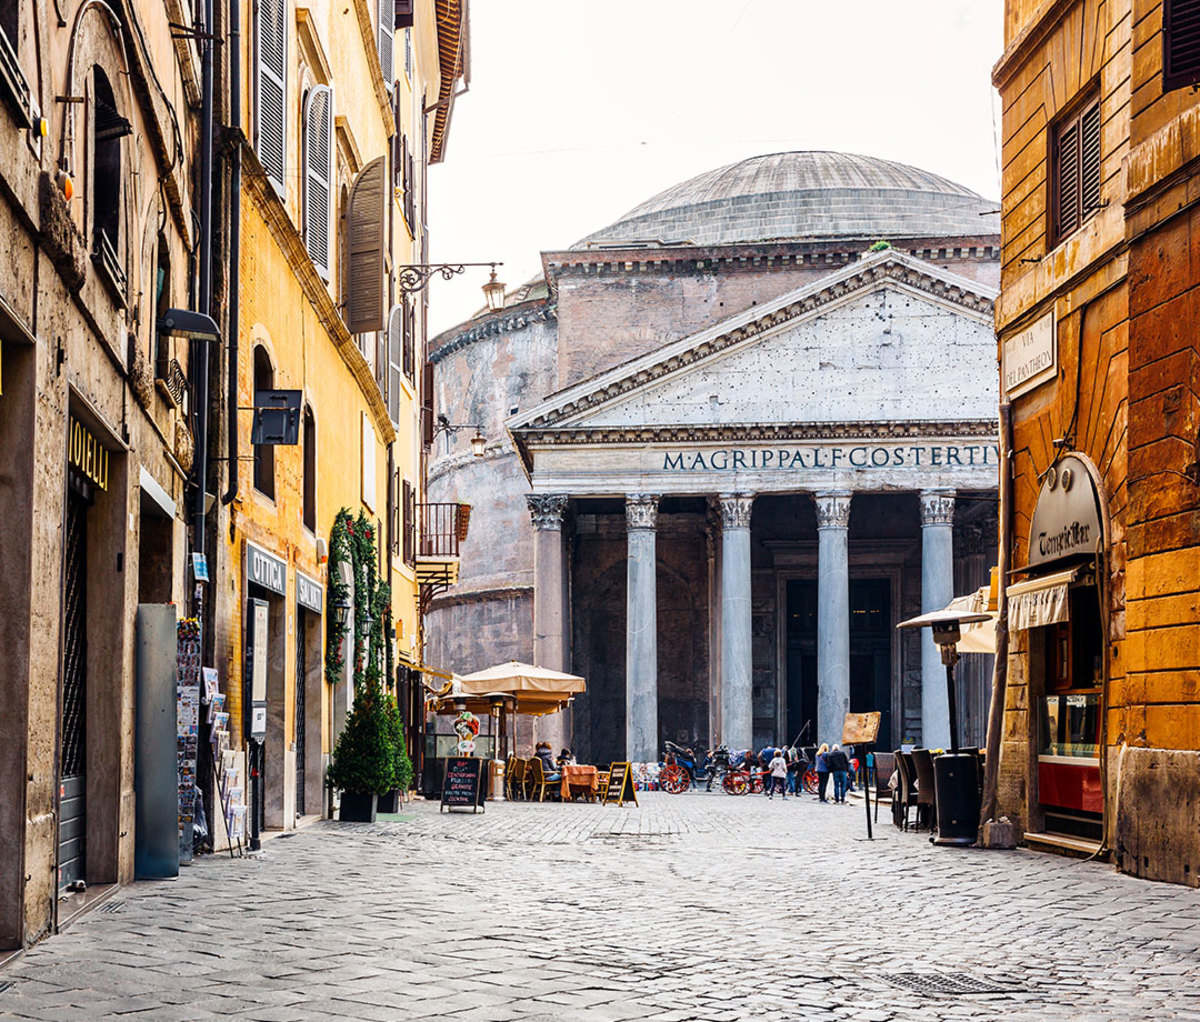 Old cobblestone street in Rome and Pantheon in the center, Italy